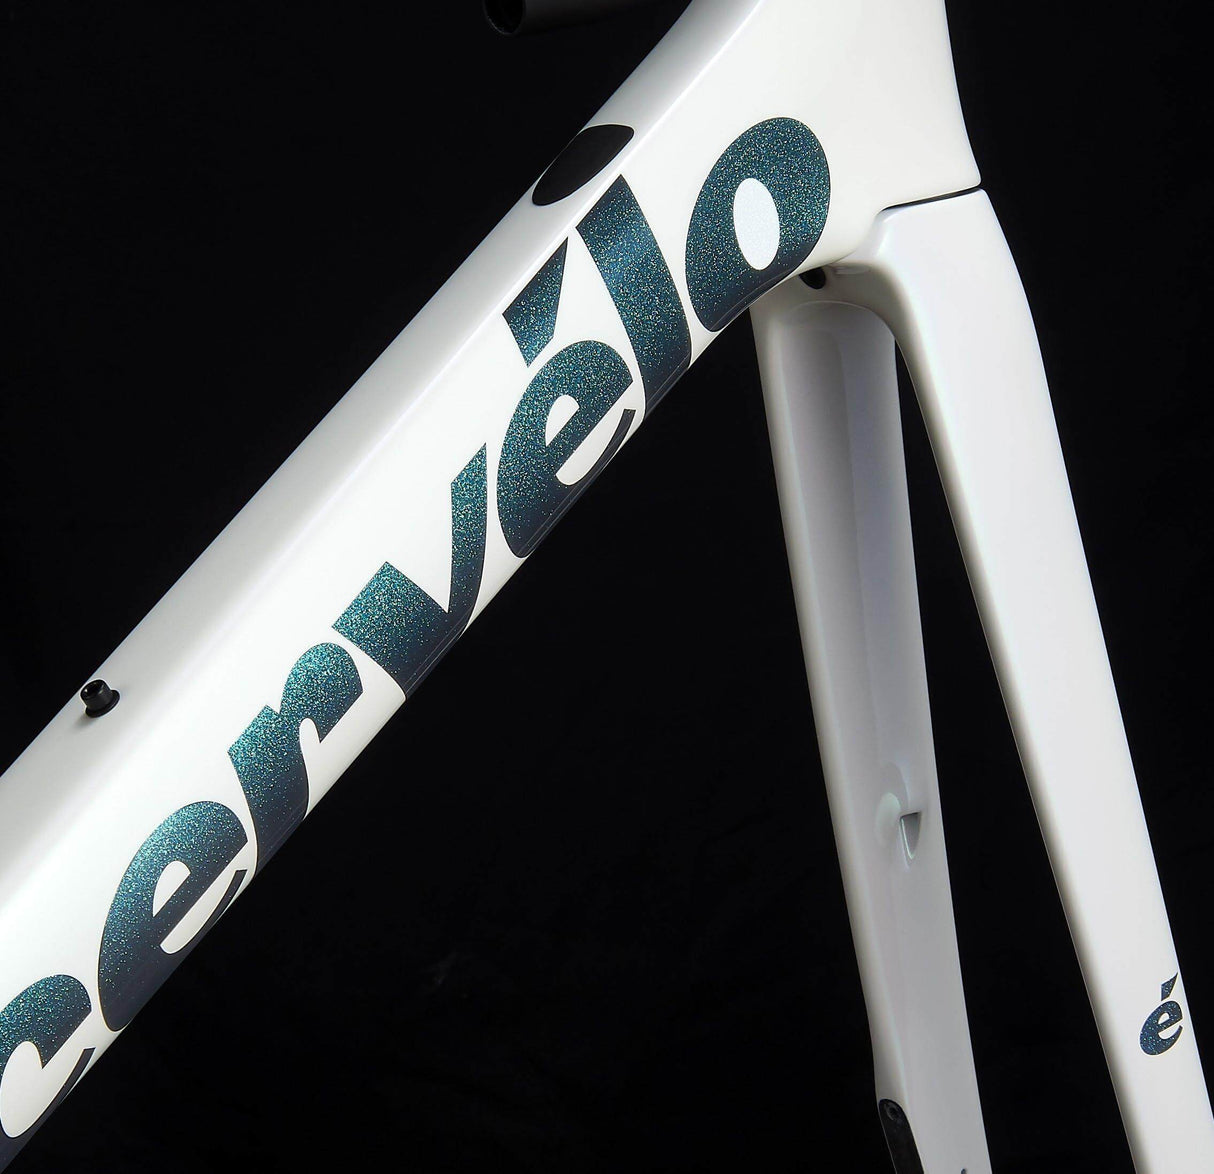 Cervelo Caledonia-5 Rival eTap AXS | Strictly Bicycles